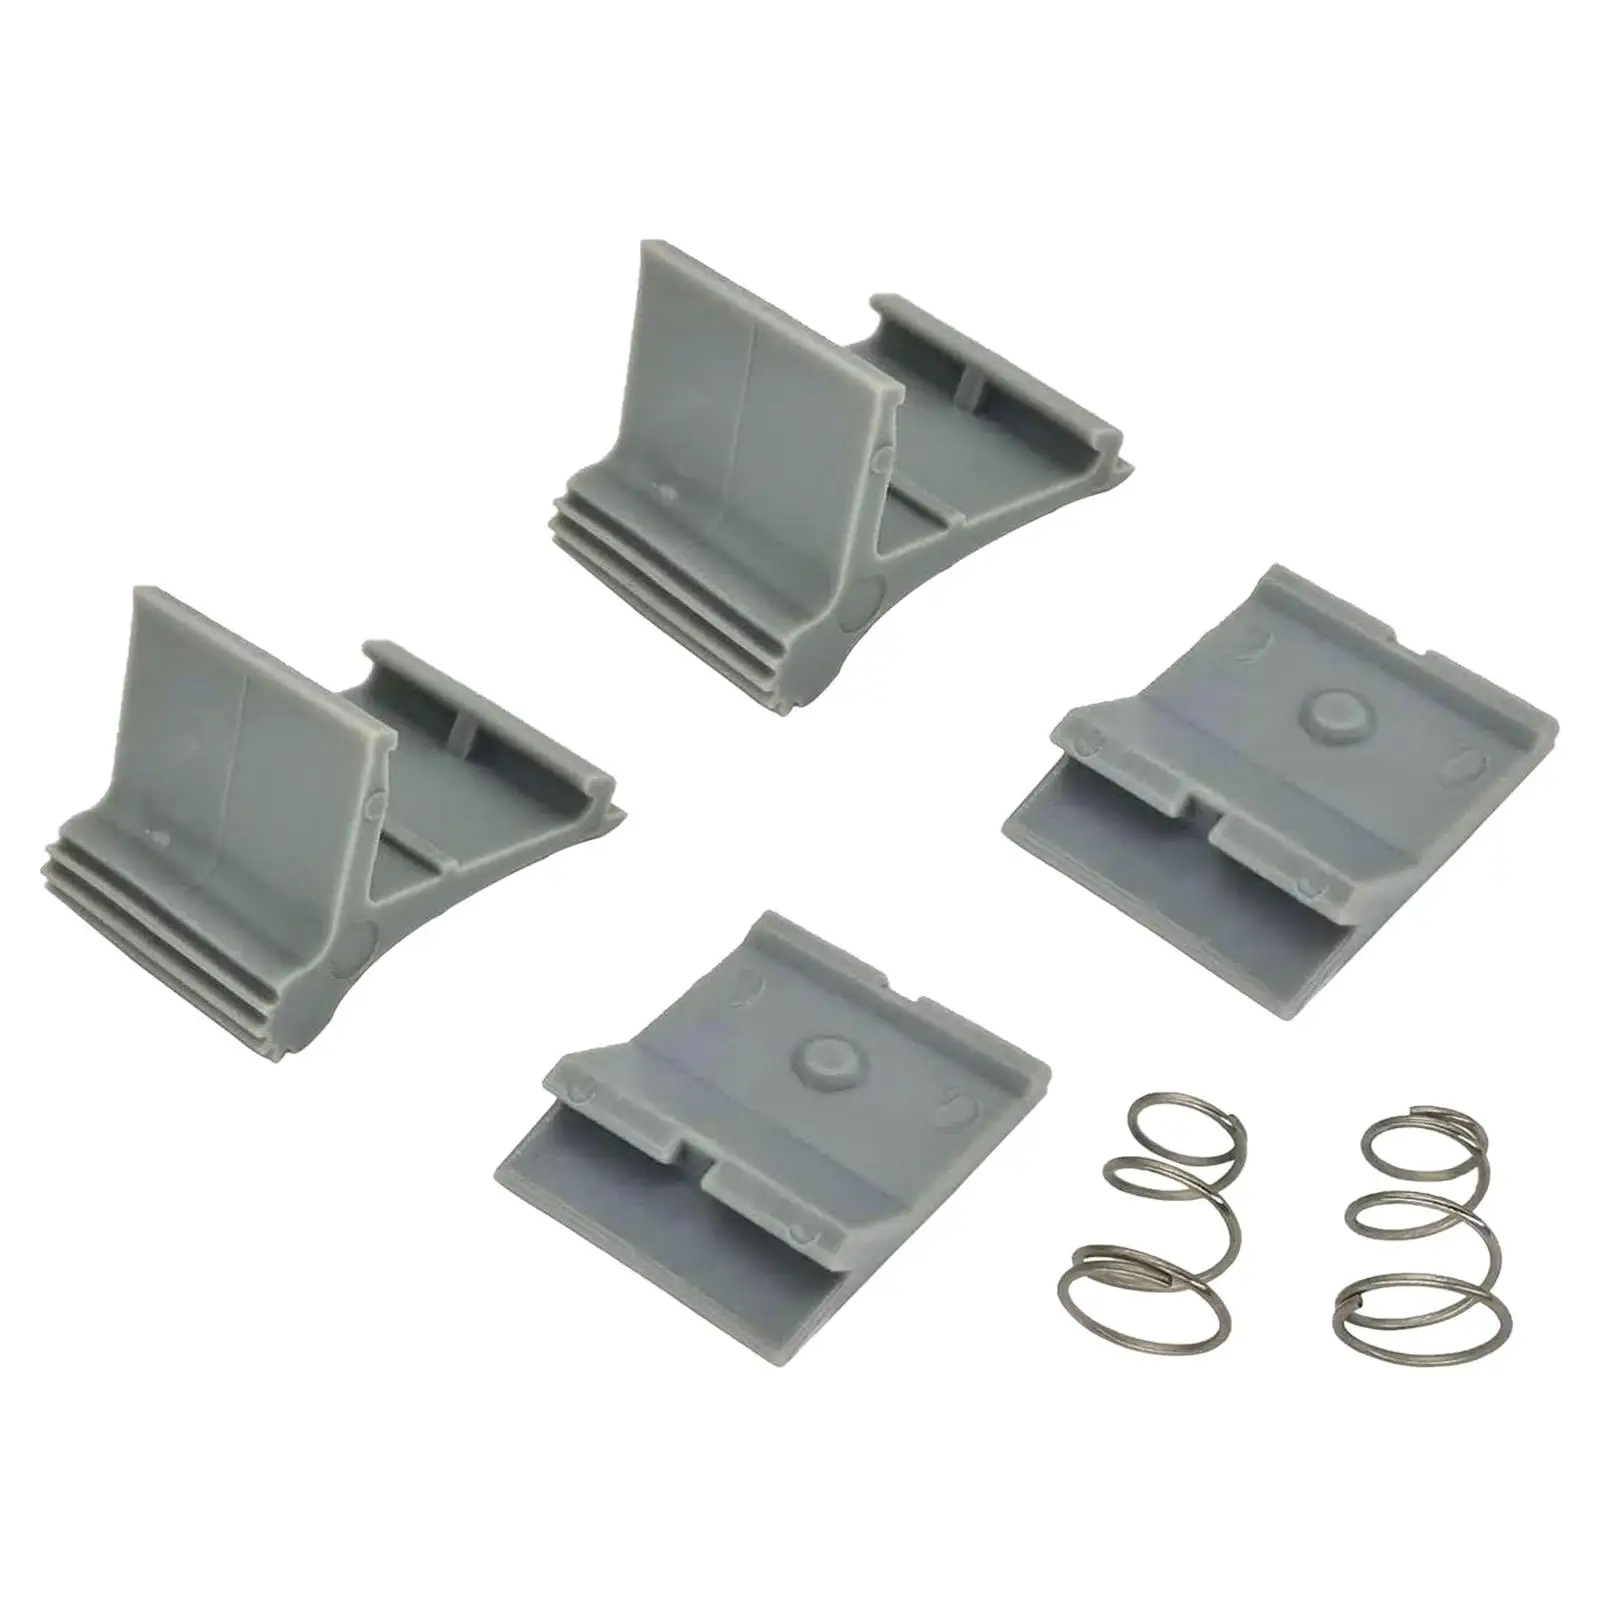 Awning Arm Slider Catch Set with 2 Springs 4 Slider Catch Spare Parts Accessories Replacement Easy to Install for Motorhome